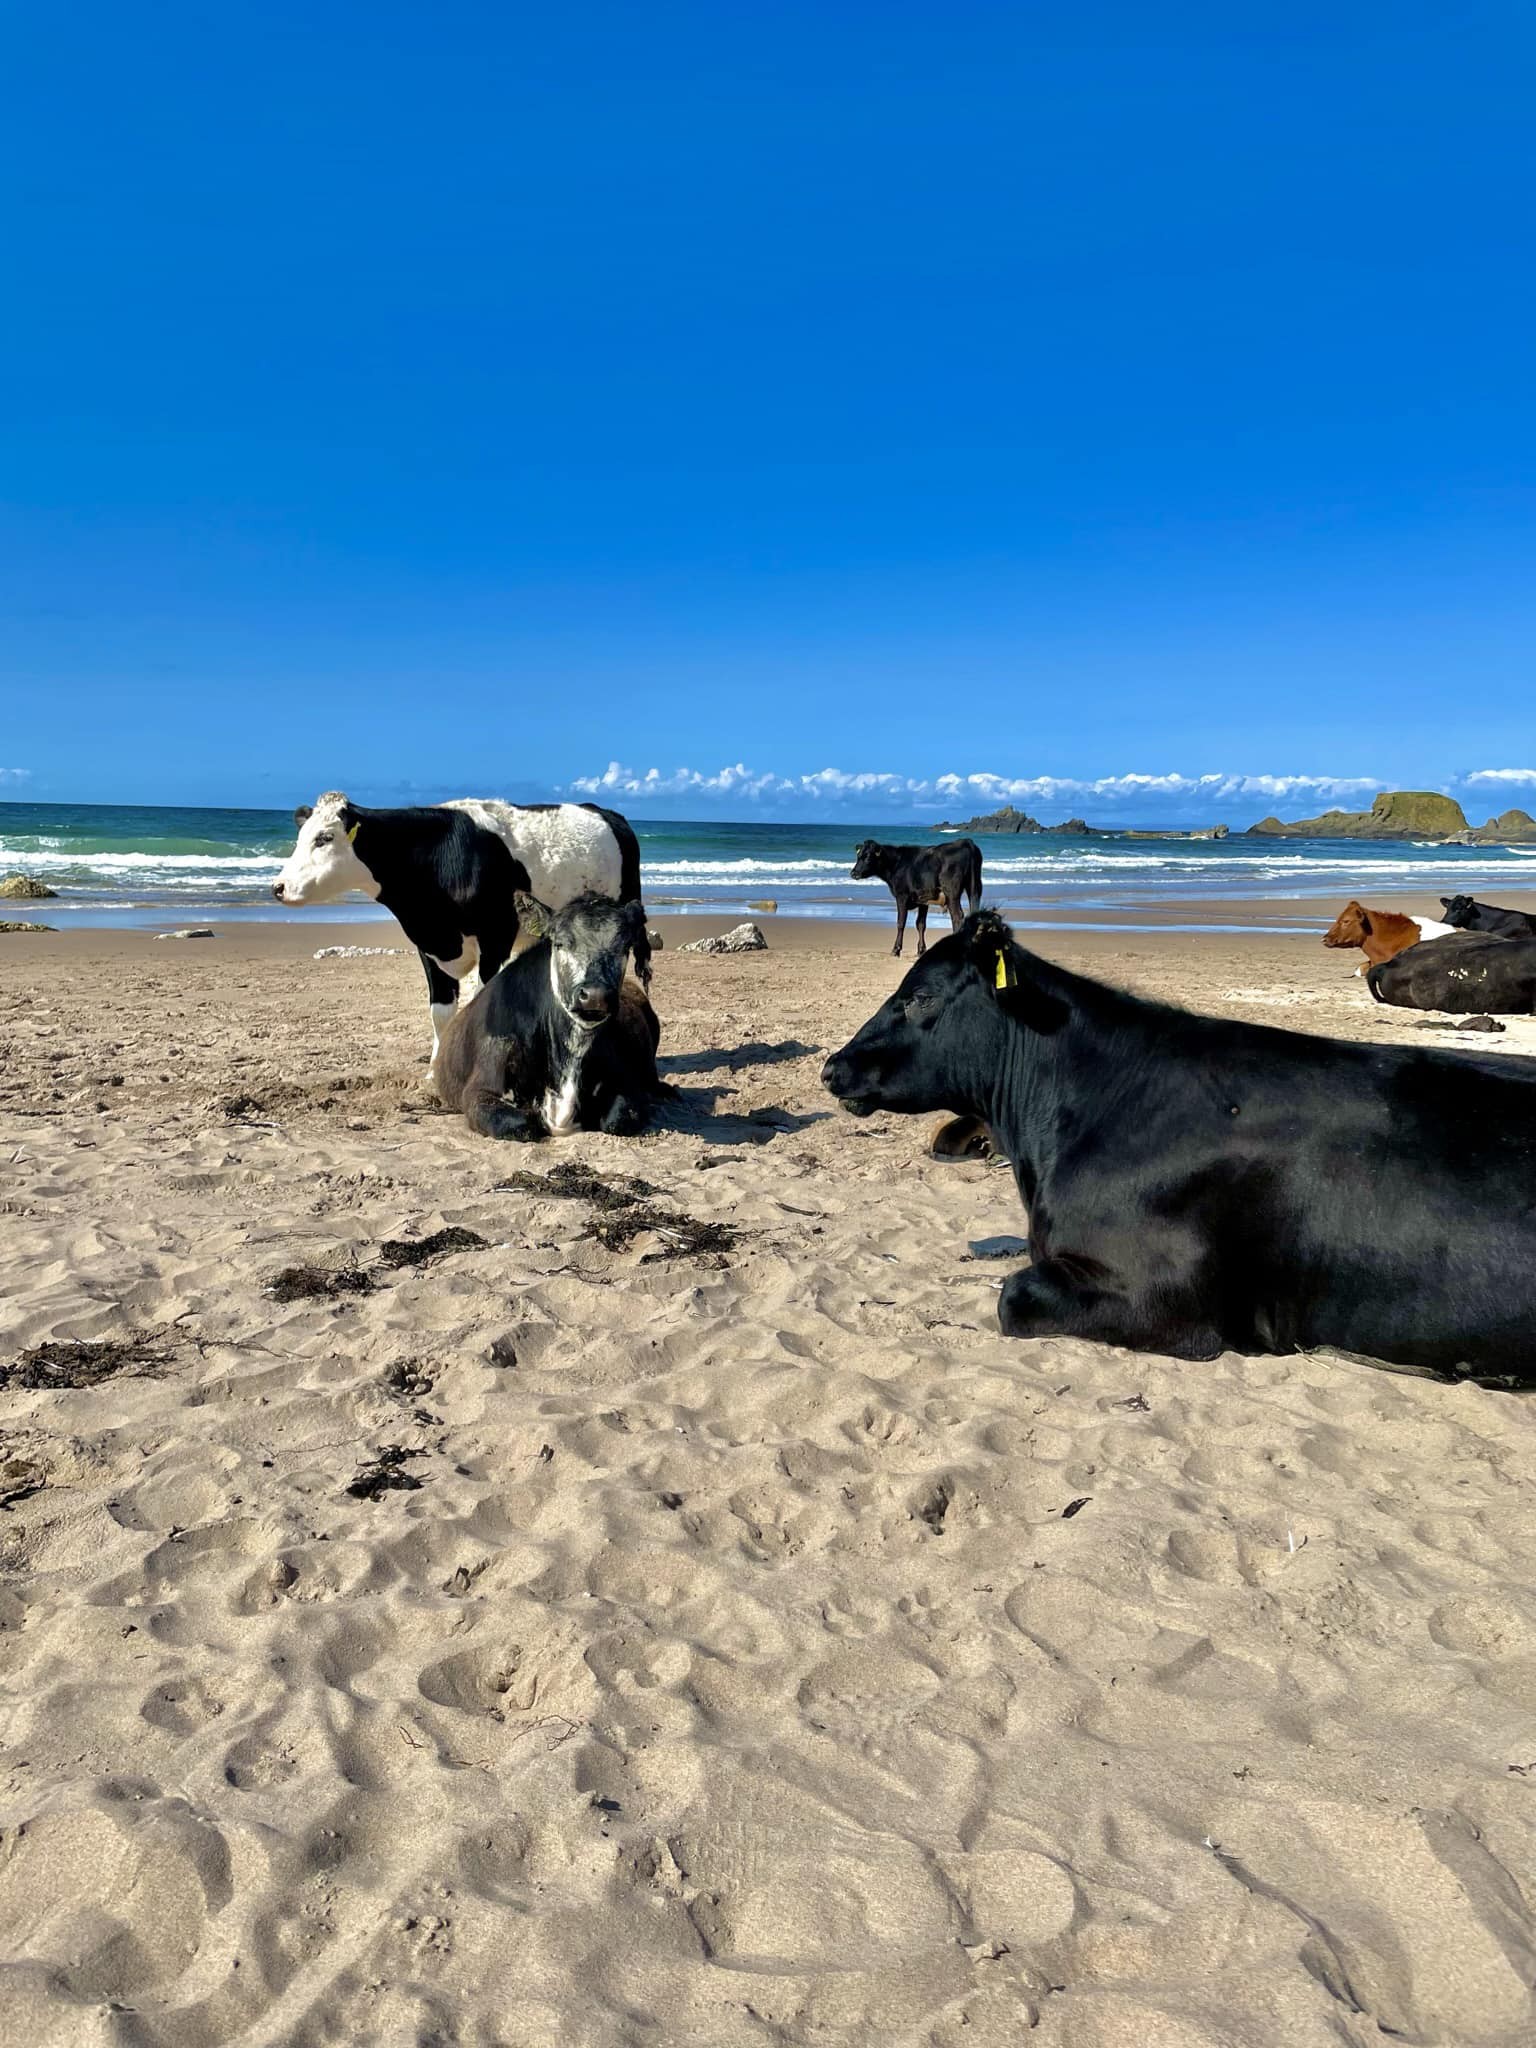 History and Significance of Cow Beach